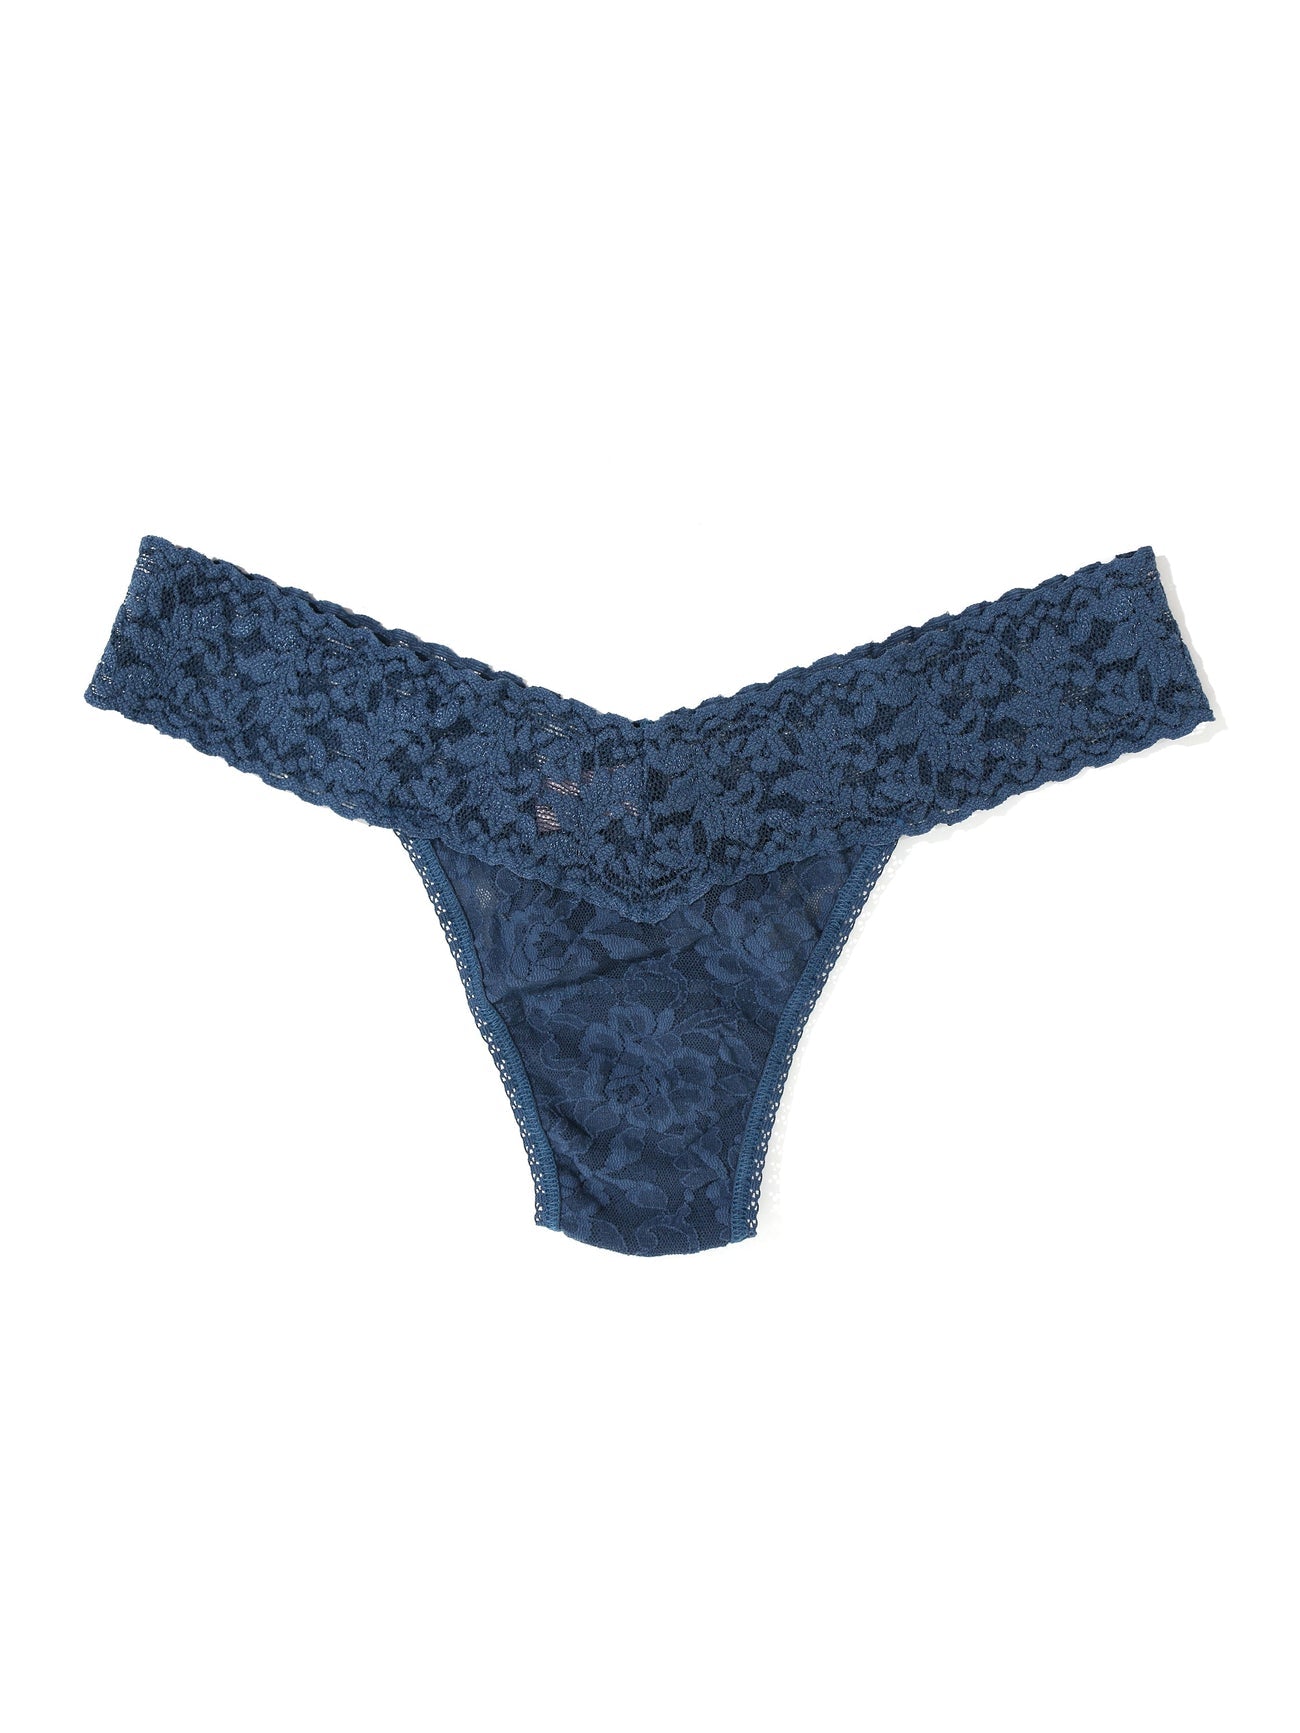 Hanky Panky Signature Lace Low Rise Thong 4911 - In the Mood